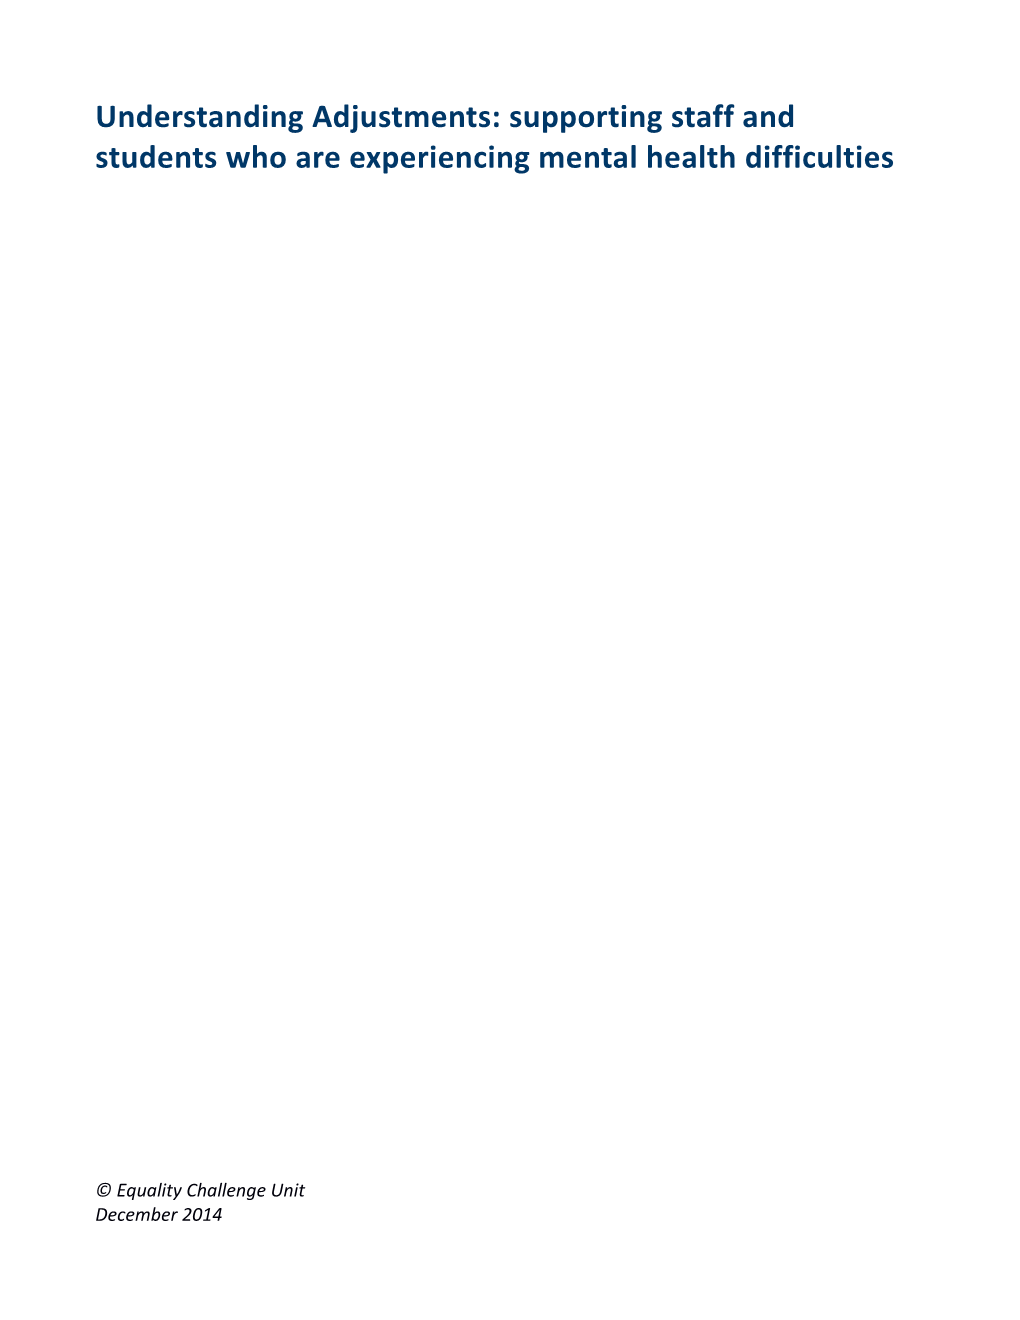 Understanding Adjustments: Supporting Staff and Students Who Are Experiencing Mental Health